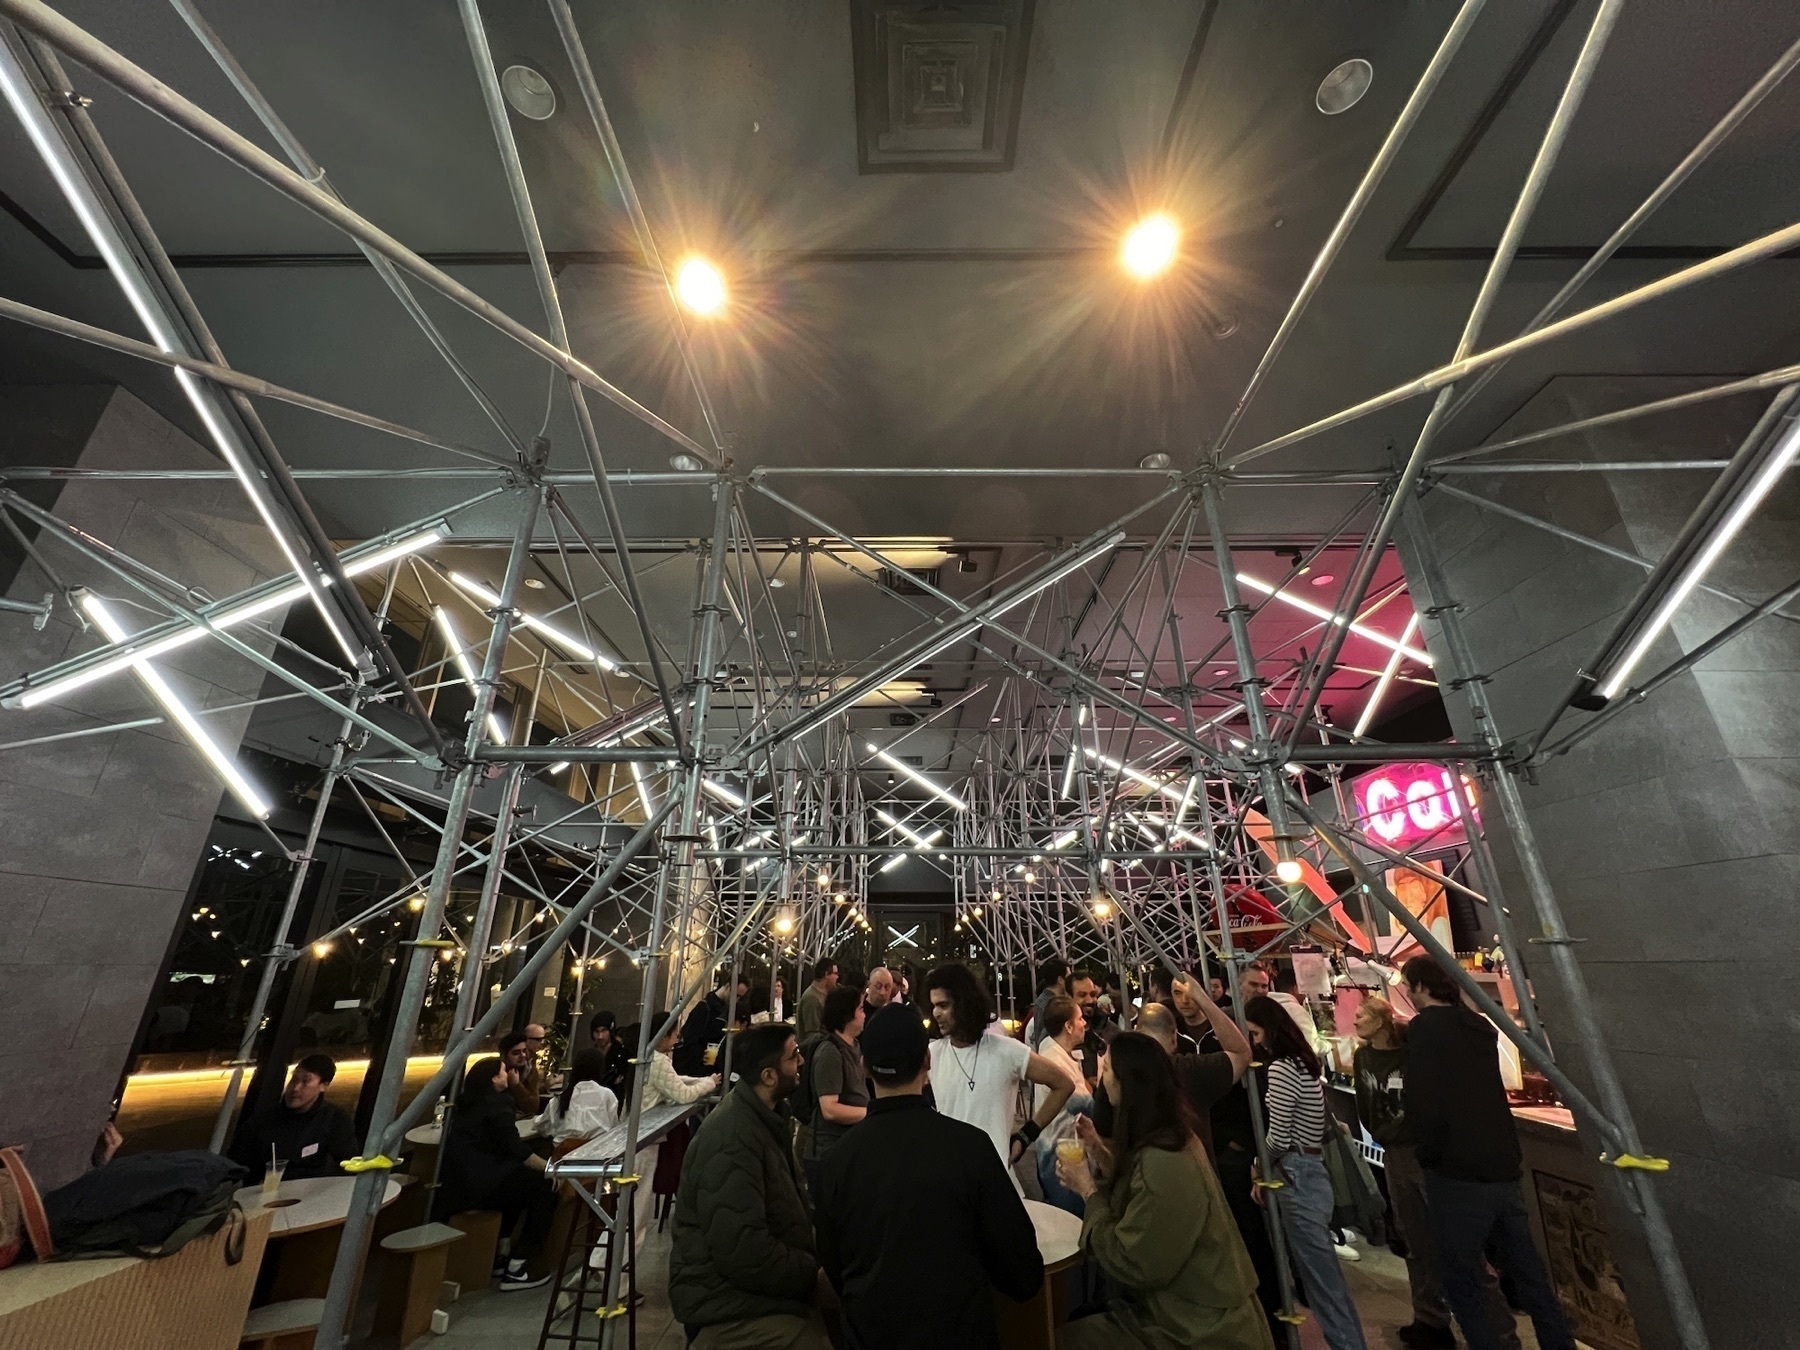 People gathered in bar restaurant under some decorative scaffolding